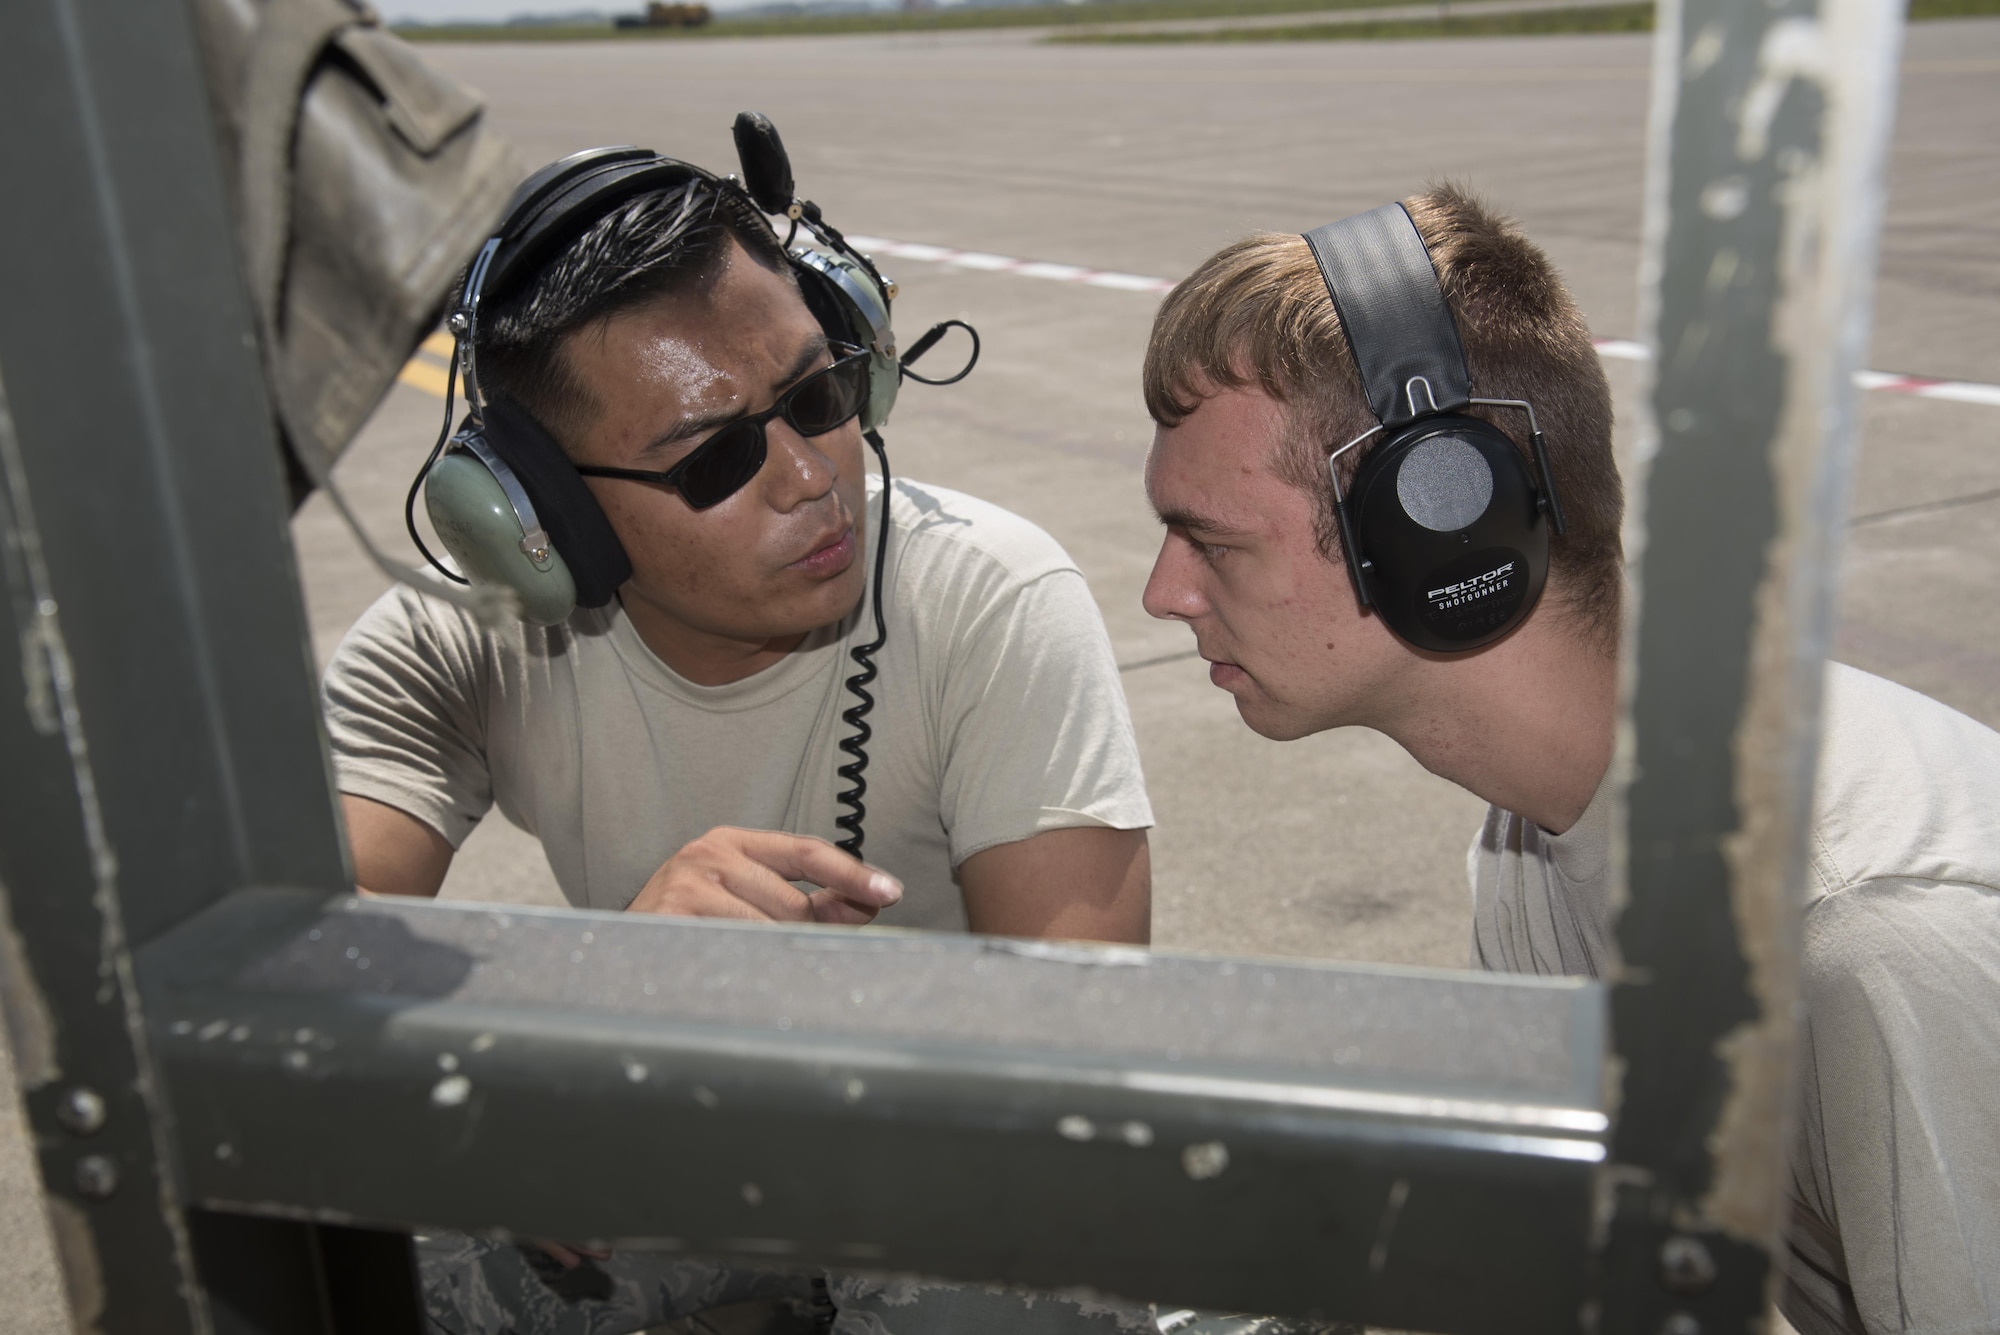 U.S. Air Force Staff Sgt. Sonethasinh Sayasaeng, left, shows Airman 1st Class Talon Cotterman, right, both 35th Maintenance Squadron avionics technicians, how to install the M7.1 upgrade to an F-16 Fighting Falcon at Misawa Air Base, Japan, July 13, 2017. Misawa is receiving the M7.1, an avionics system upgrade, to further enhance the fleet’s readiness, situational awareness and tactical capabilities, ensuring Misawa provides the highest level of stability in the Indo-Asia- Pacific region and peace of mind for our allies. (U.S. Air Force photo by Airman 1st Class Sadie Colbert)